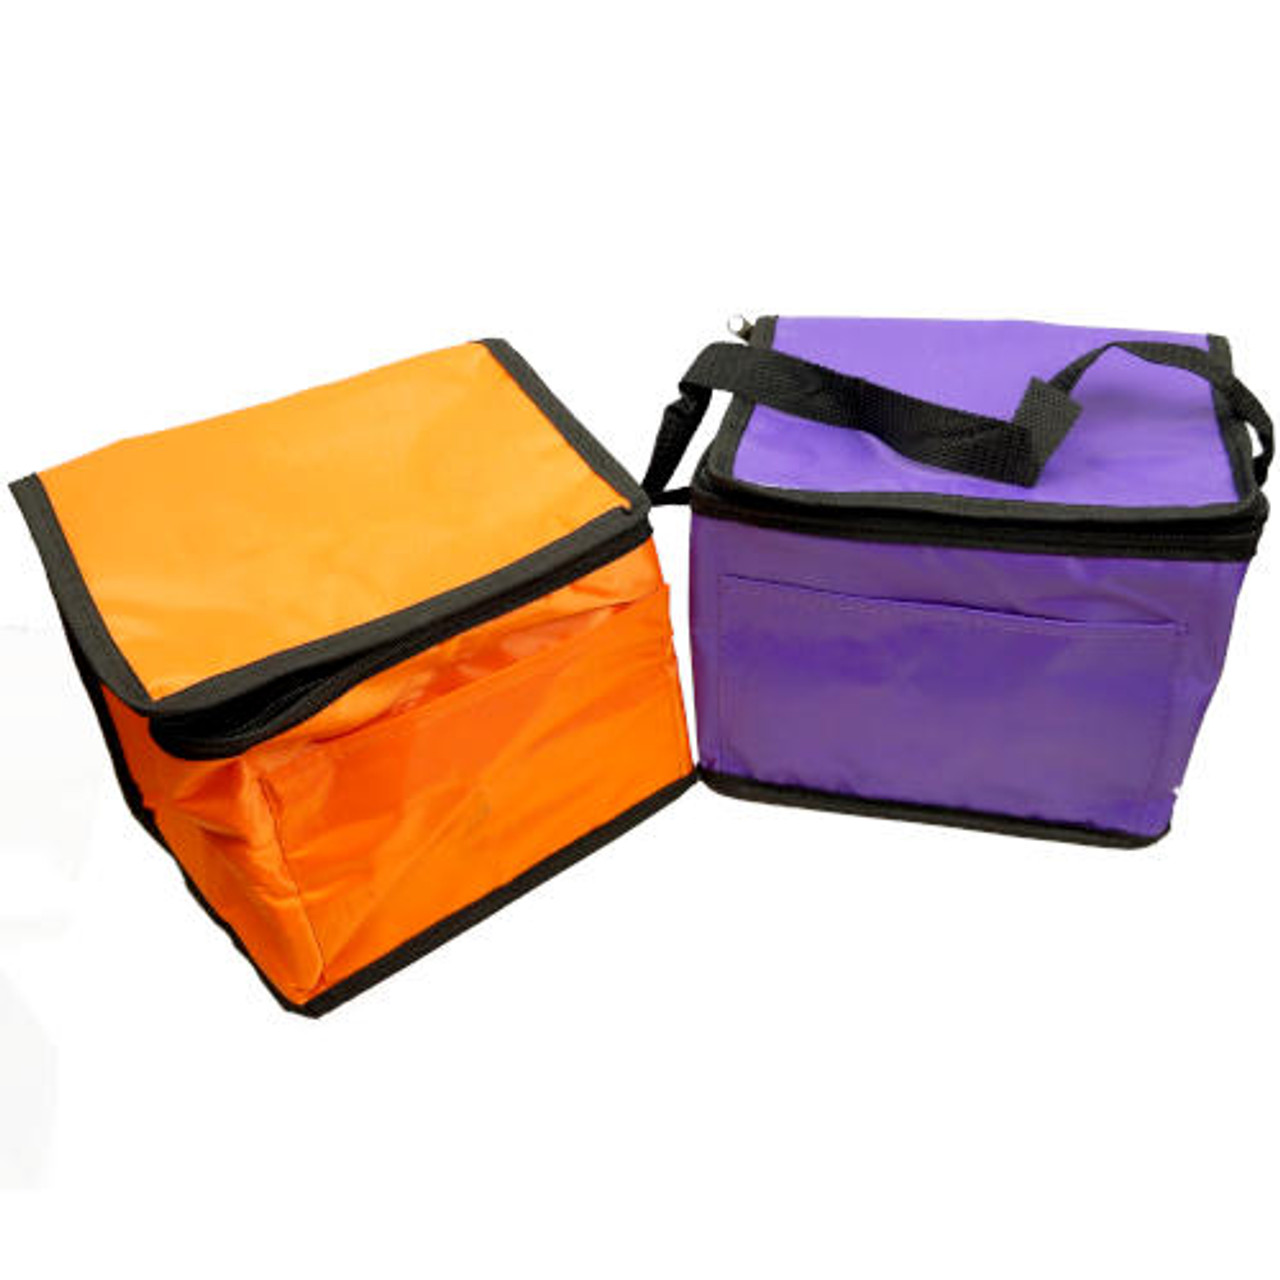 Insulated Tote Bags, Tote Cooler Bag